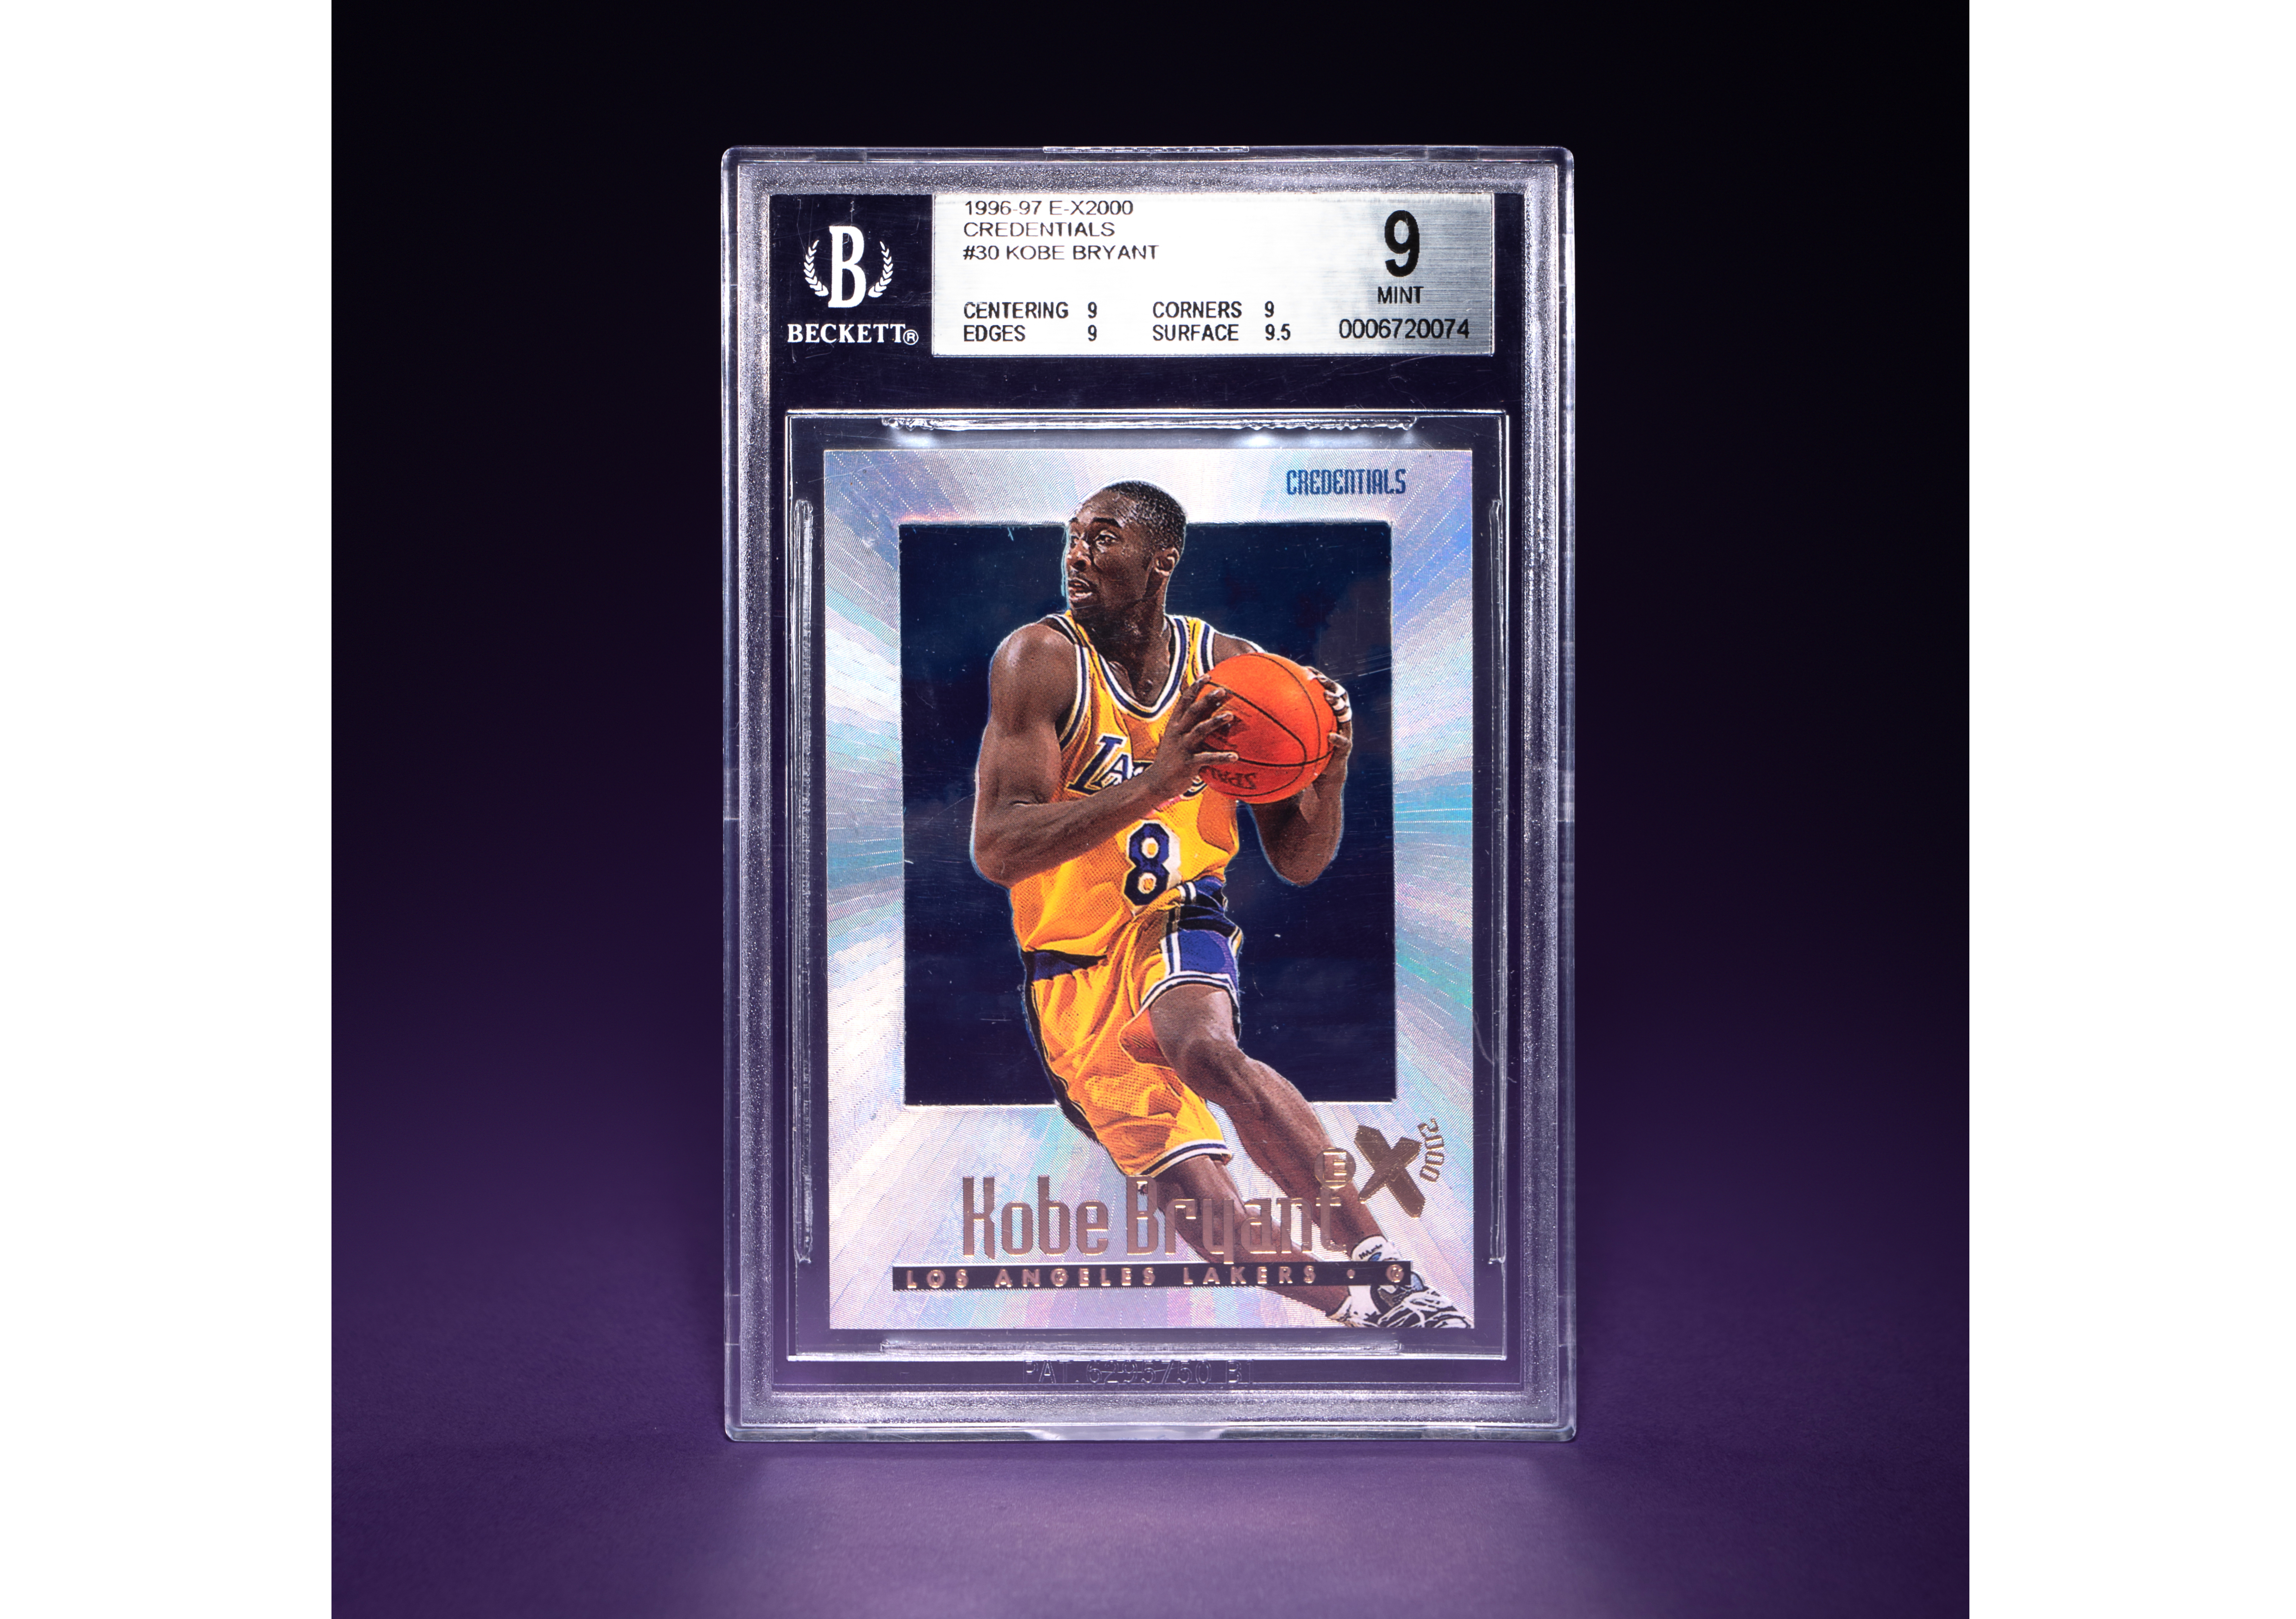 1996-97 Skybox E-X2000 Credentials Kobe Bryant rookie basketball card No. 30 (BGS 9 MINT), numbered 53 of 499, est. $15,000-$25,000